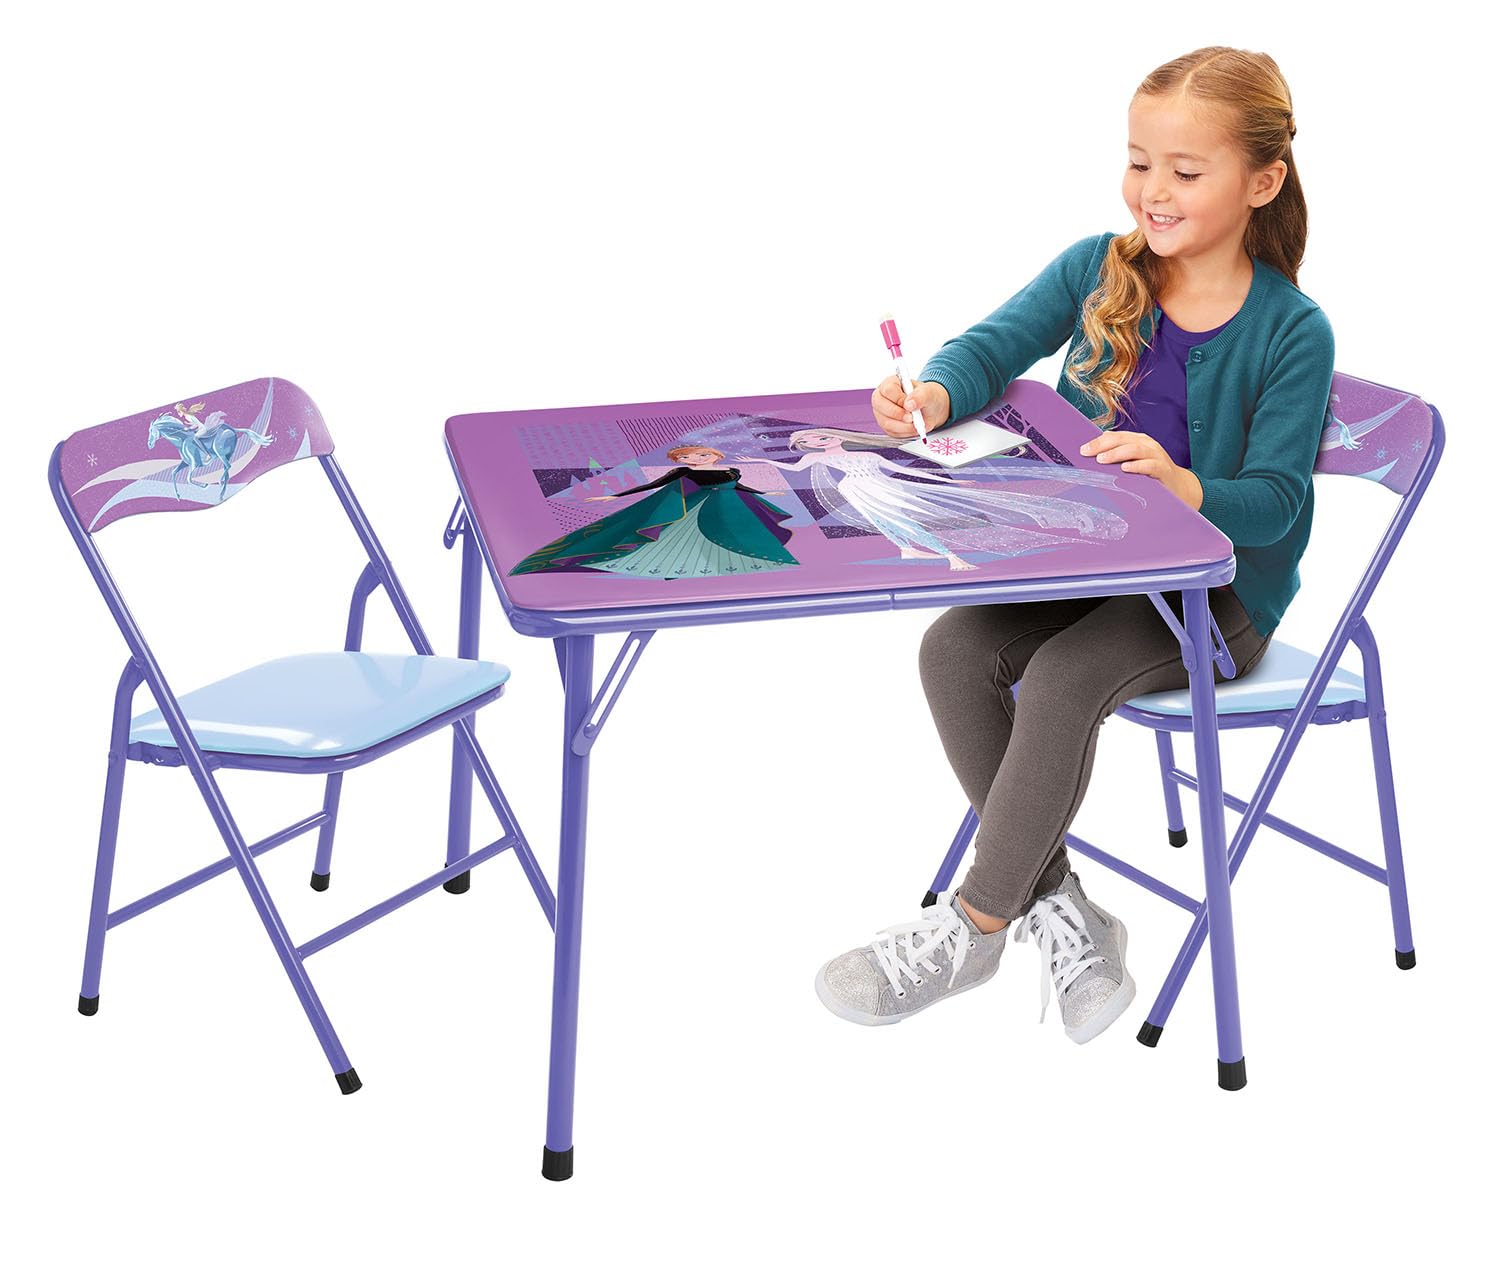 Disney Frozen Kids Folding Table & Chairs Set for Kid and Toddler 36 Months Up to 7 Years, Includes: 1 Table (36